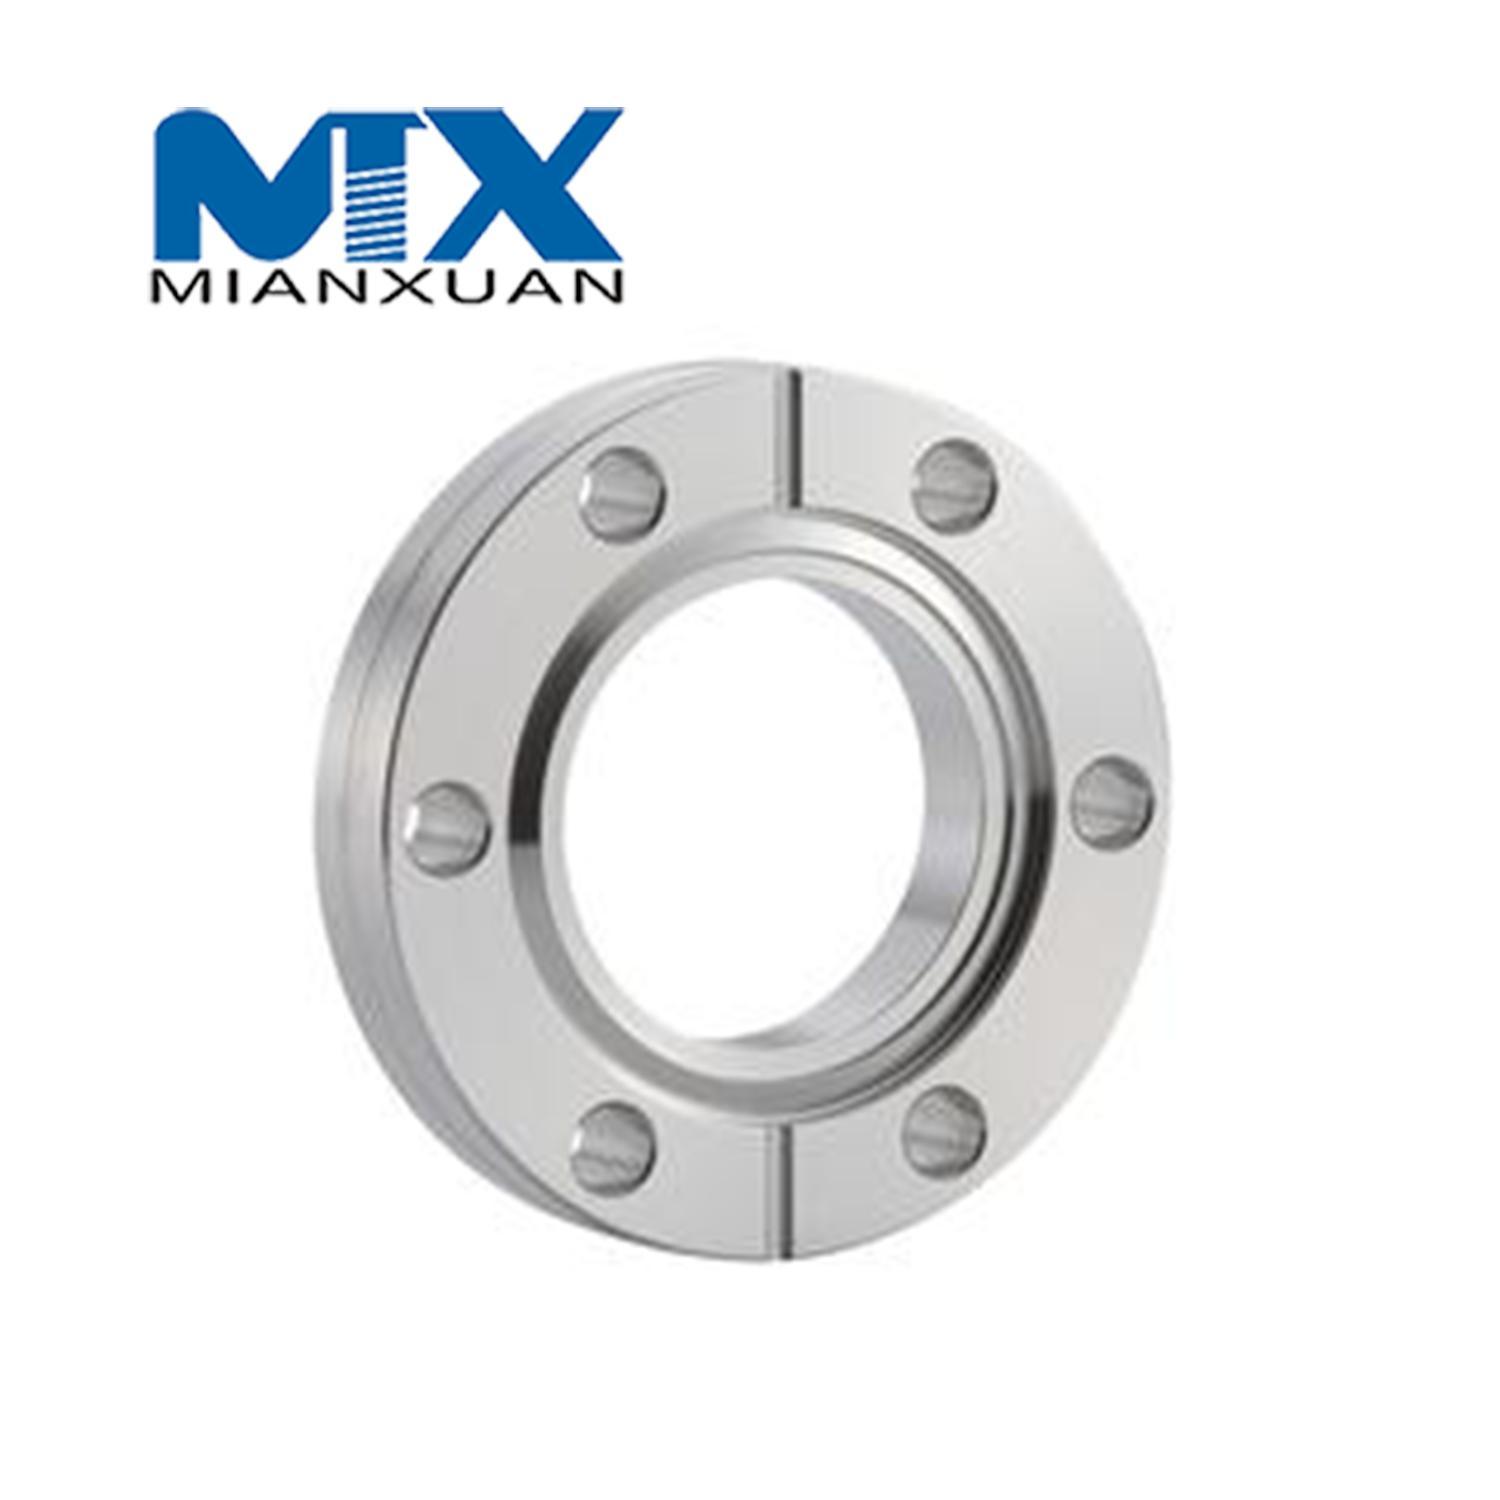 CNC Metal Stainless Steel Aluminum Precision Reducing Flange